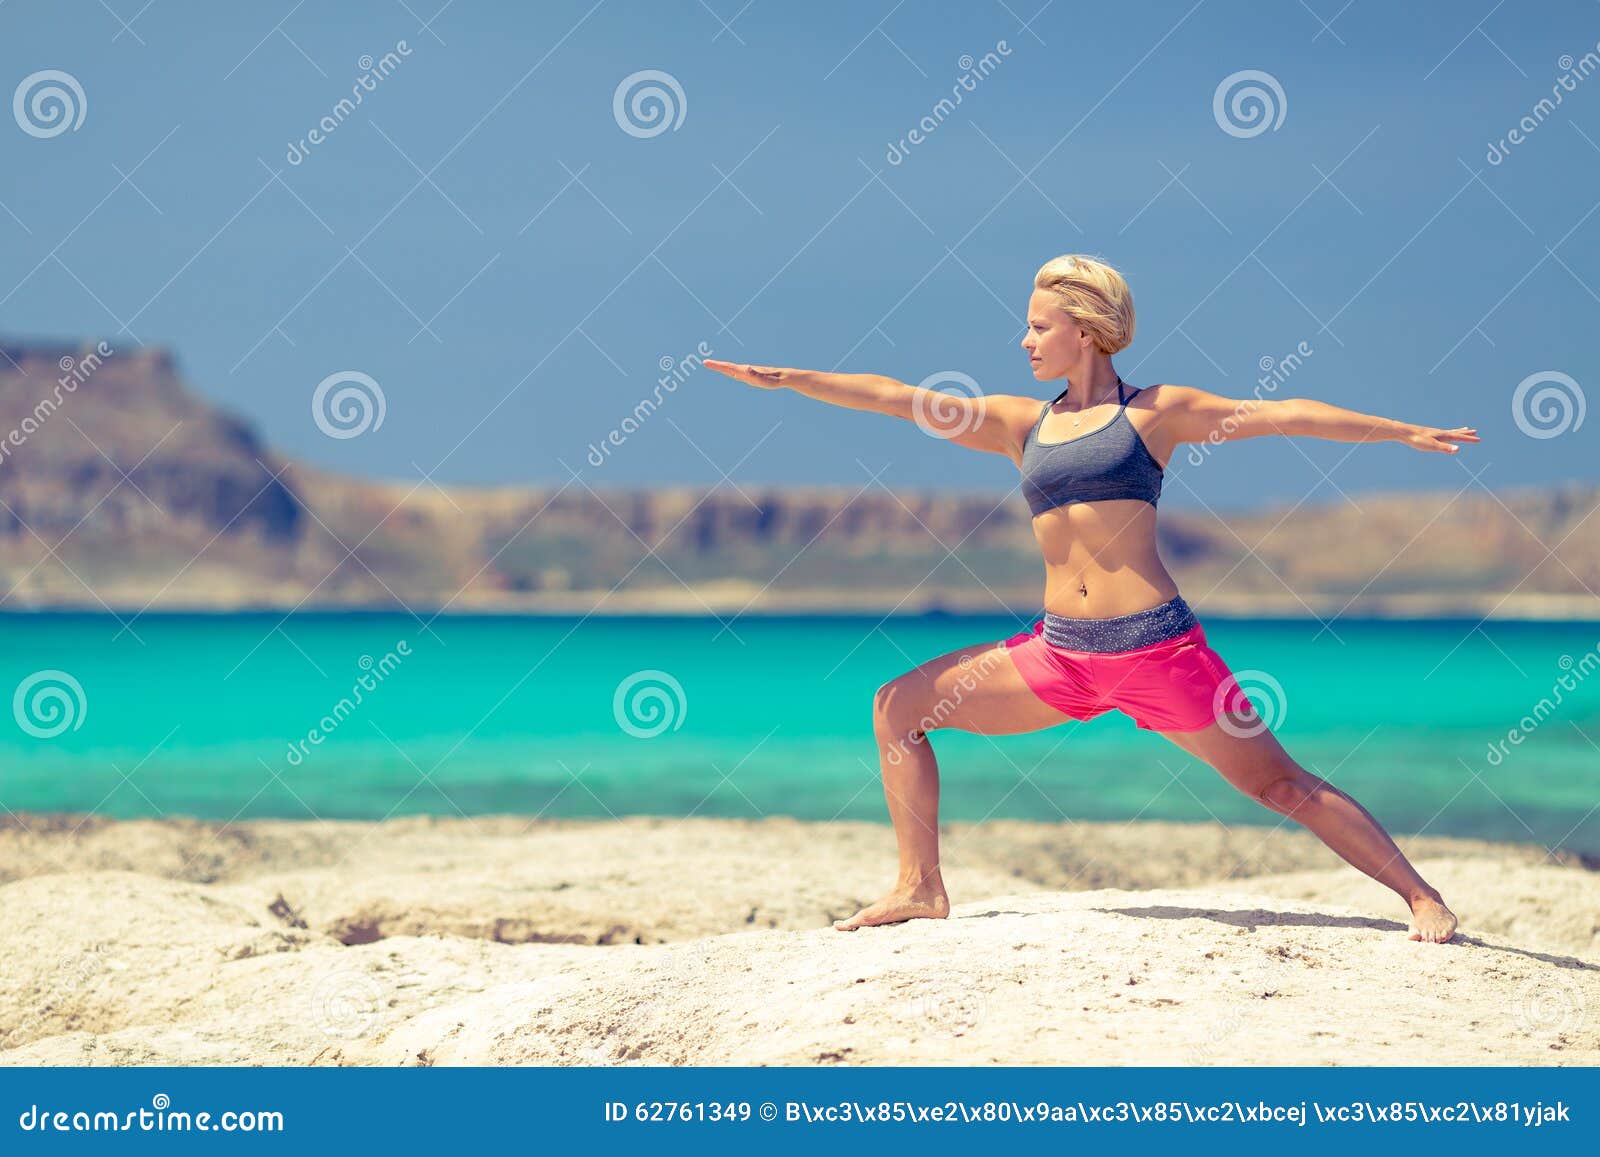 yoga pose, fit woman exercise on beach